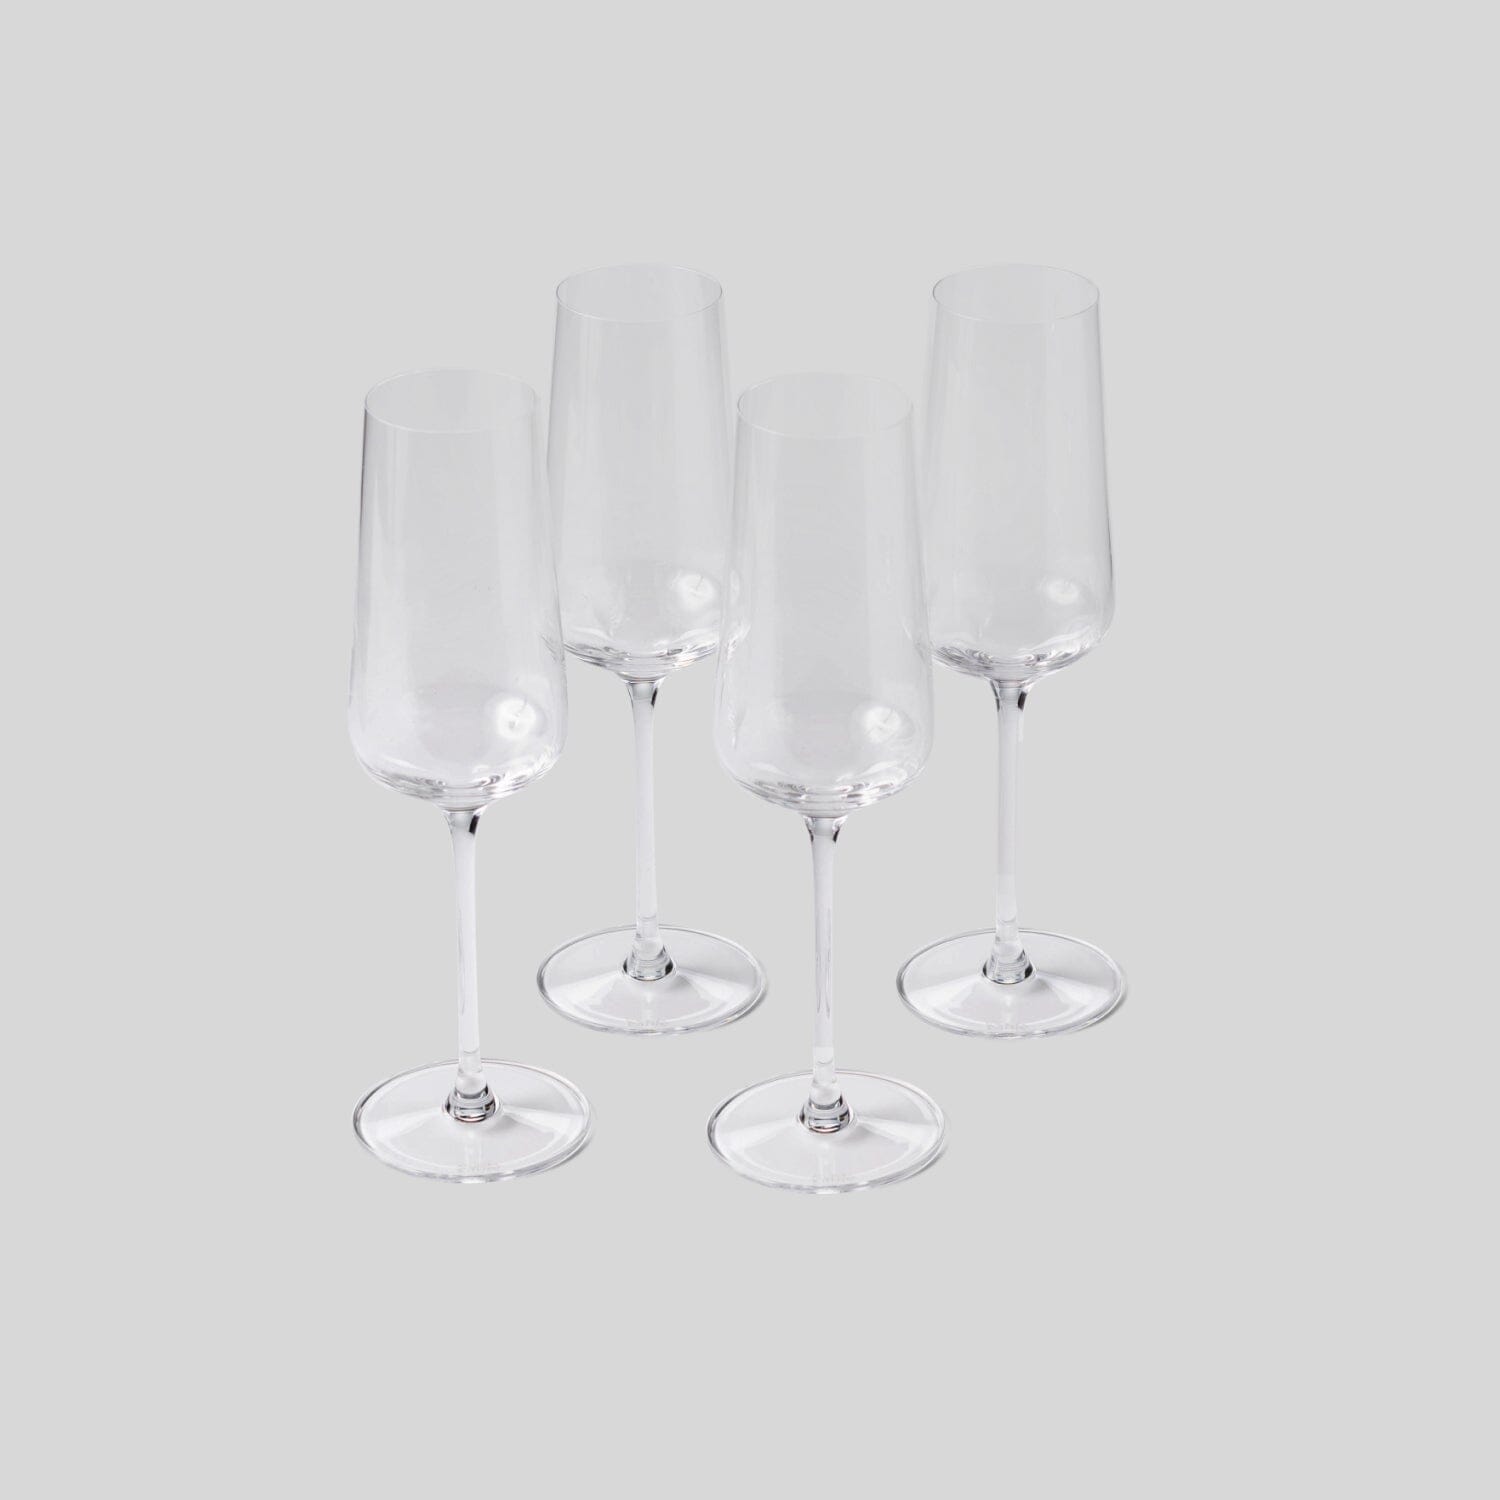 The Flute Glasses Glassware Fable Home #clear